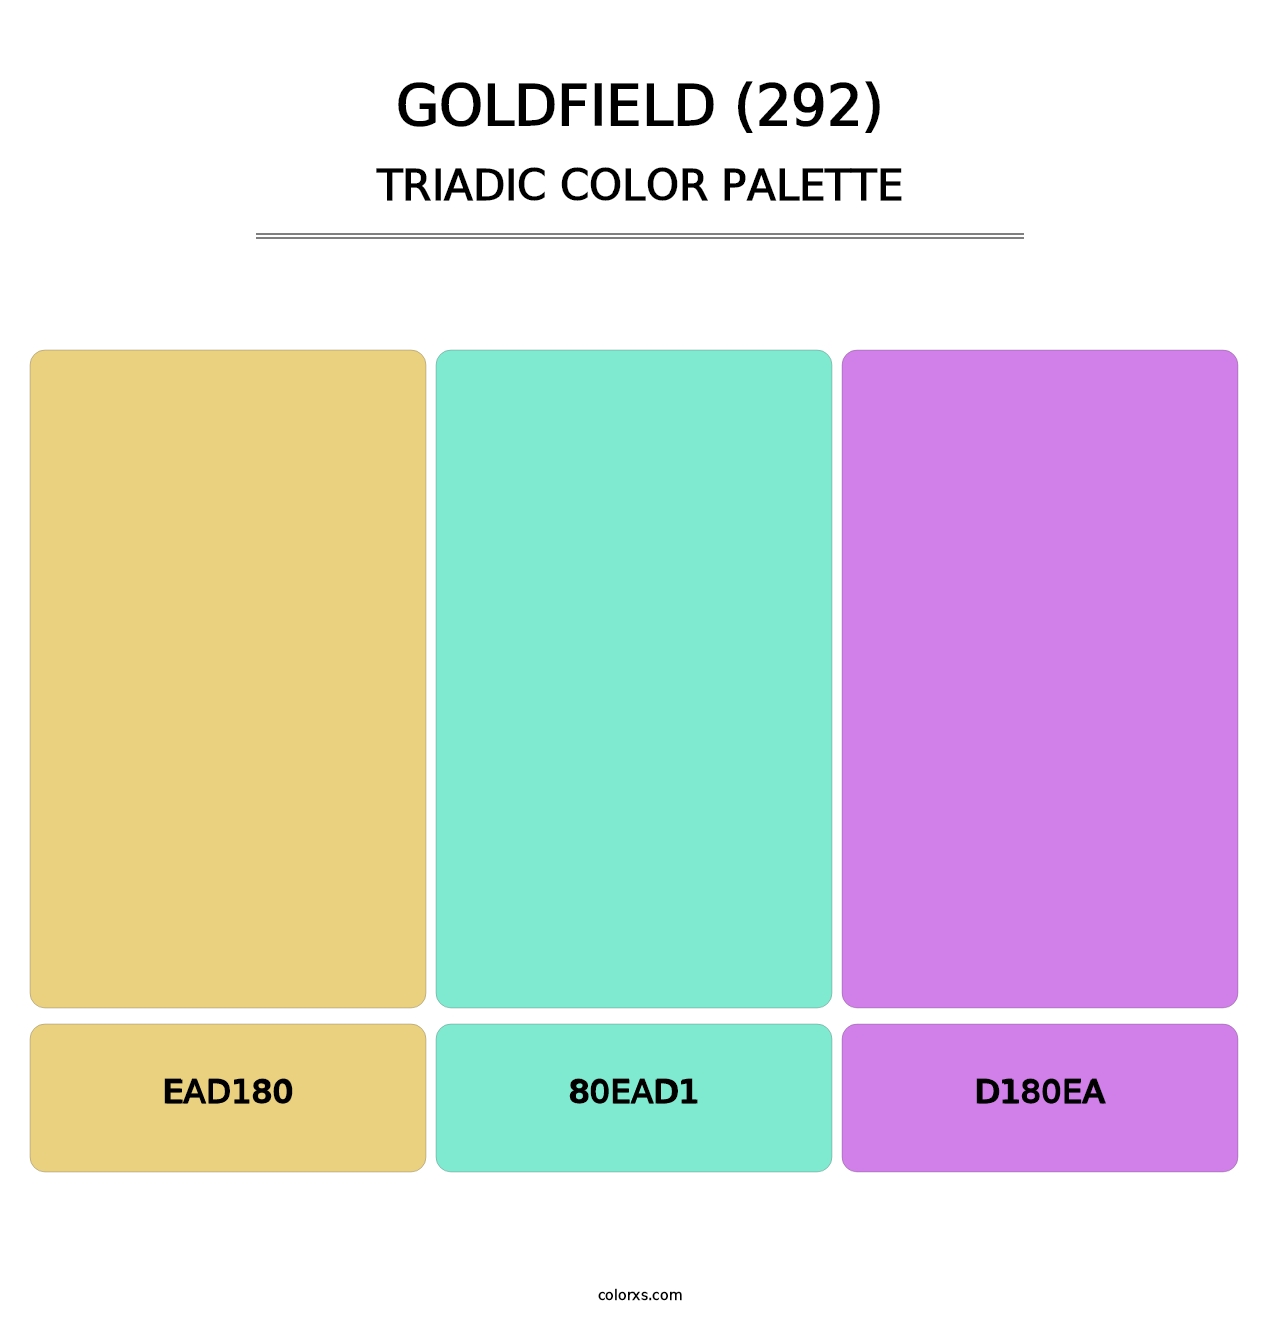 Goldfield (292) - Triadic Color Palette